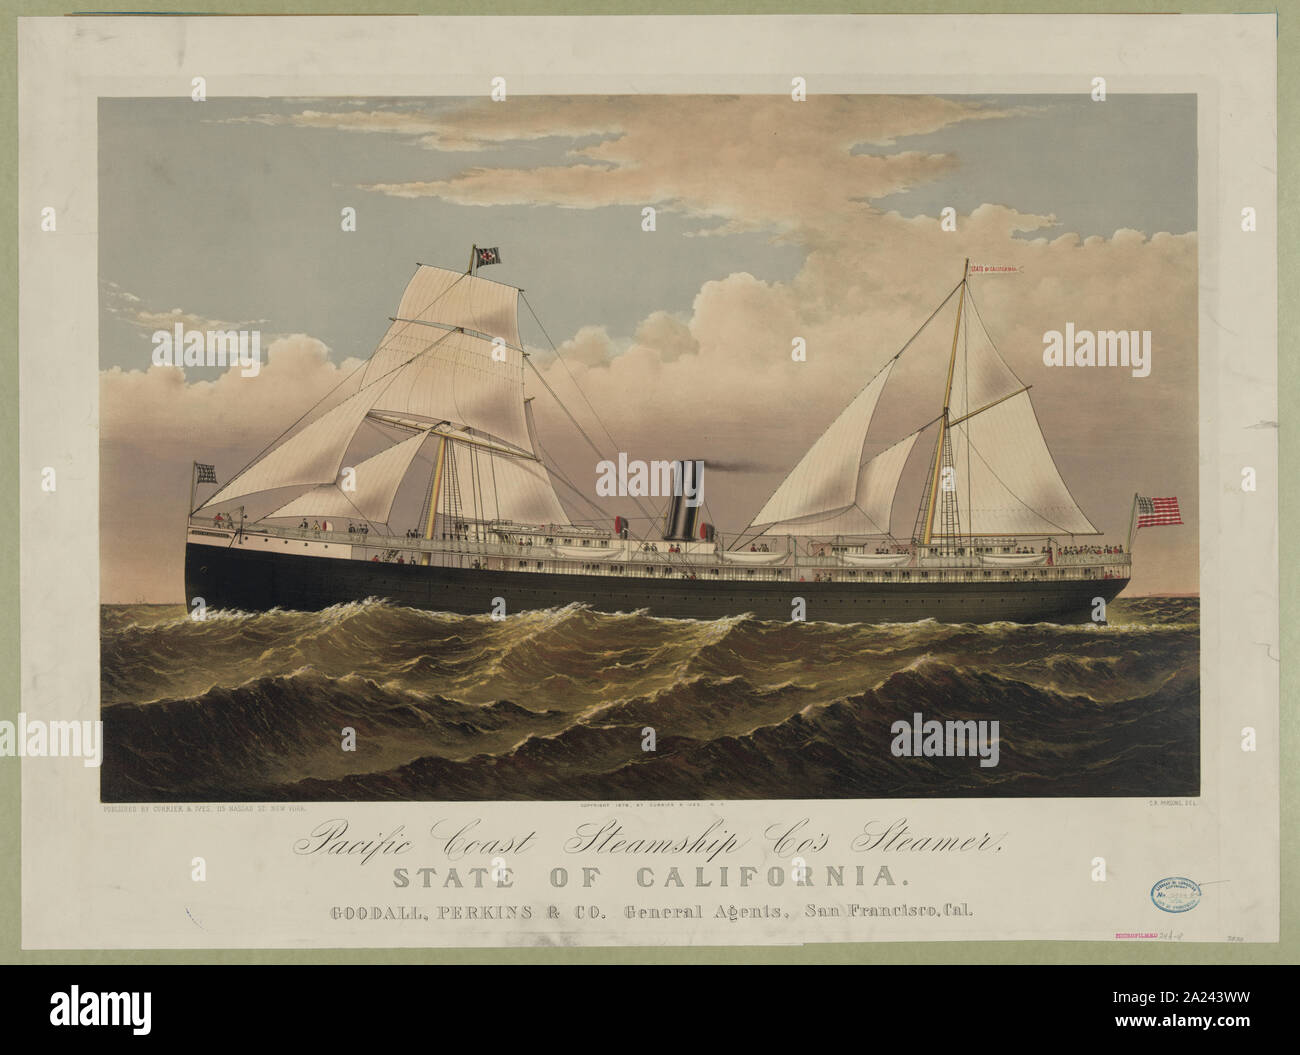 Pacific Coast Steamship Co's Steamer: State of California, Goodall, Perkins & Co. General Agents, San Francisco, Cal Stock Photo